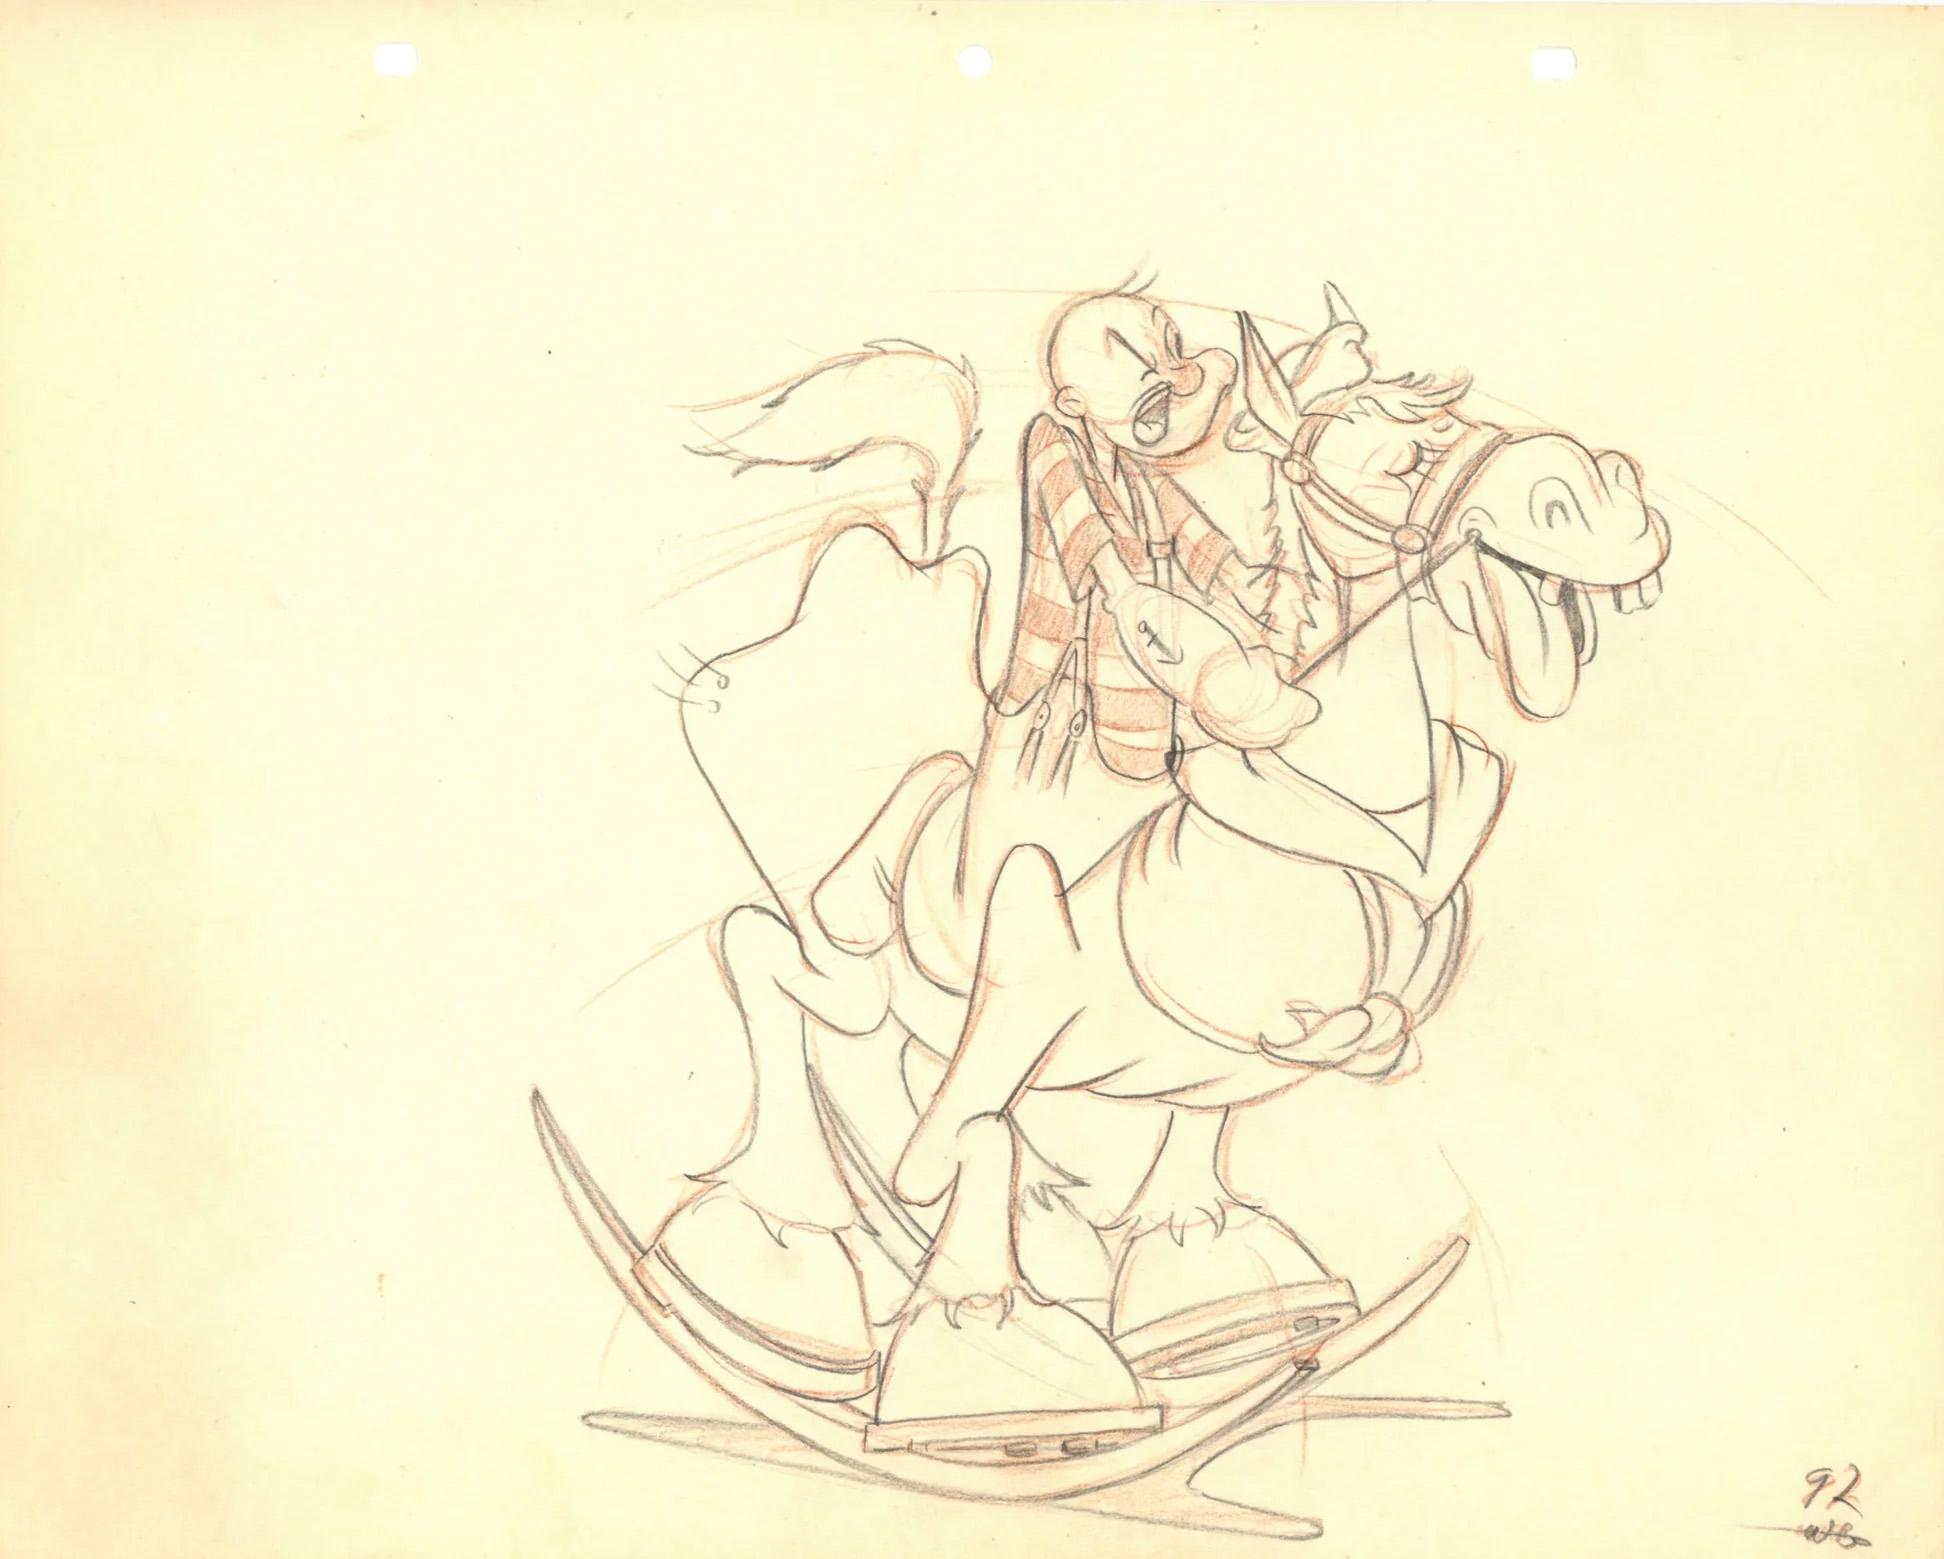 Popeye "Her Honor the Mare" (1943) Original Production Drawing - Art by Hanna Barbera Studio Artists